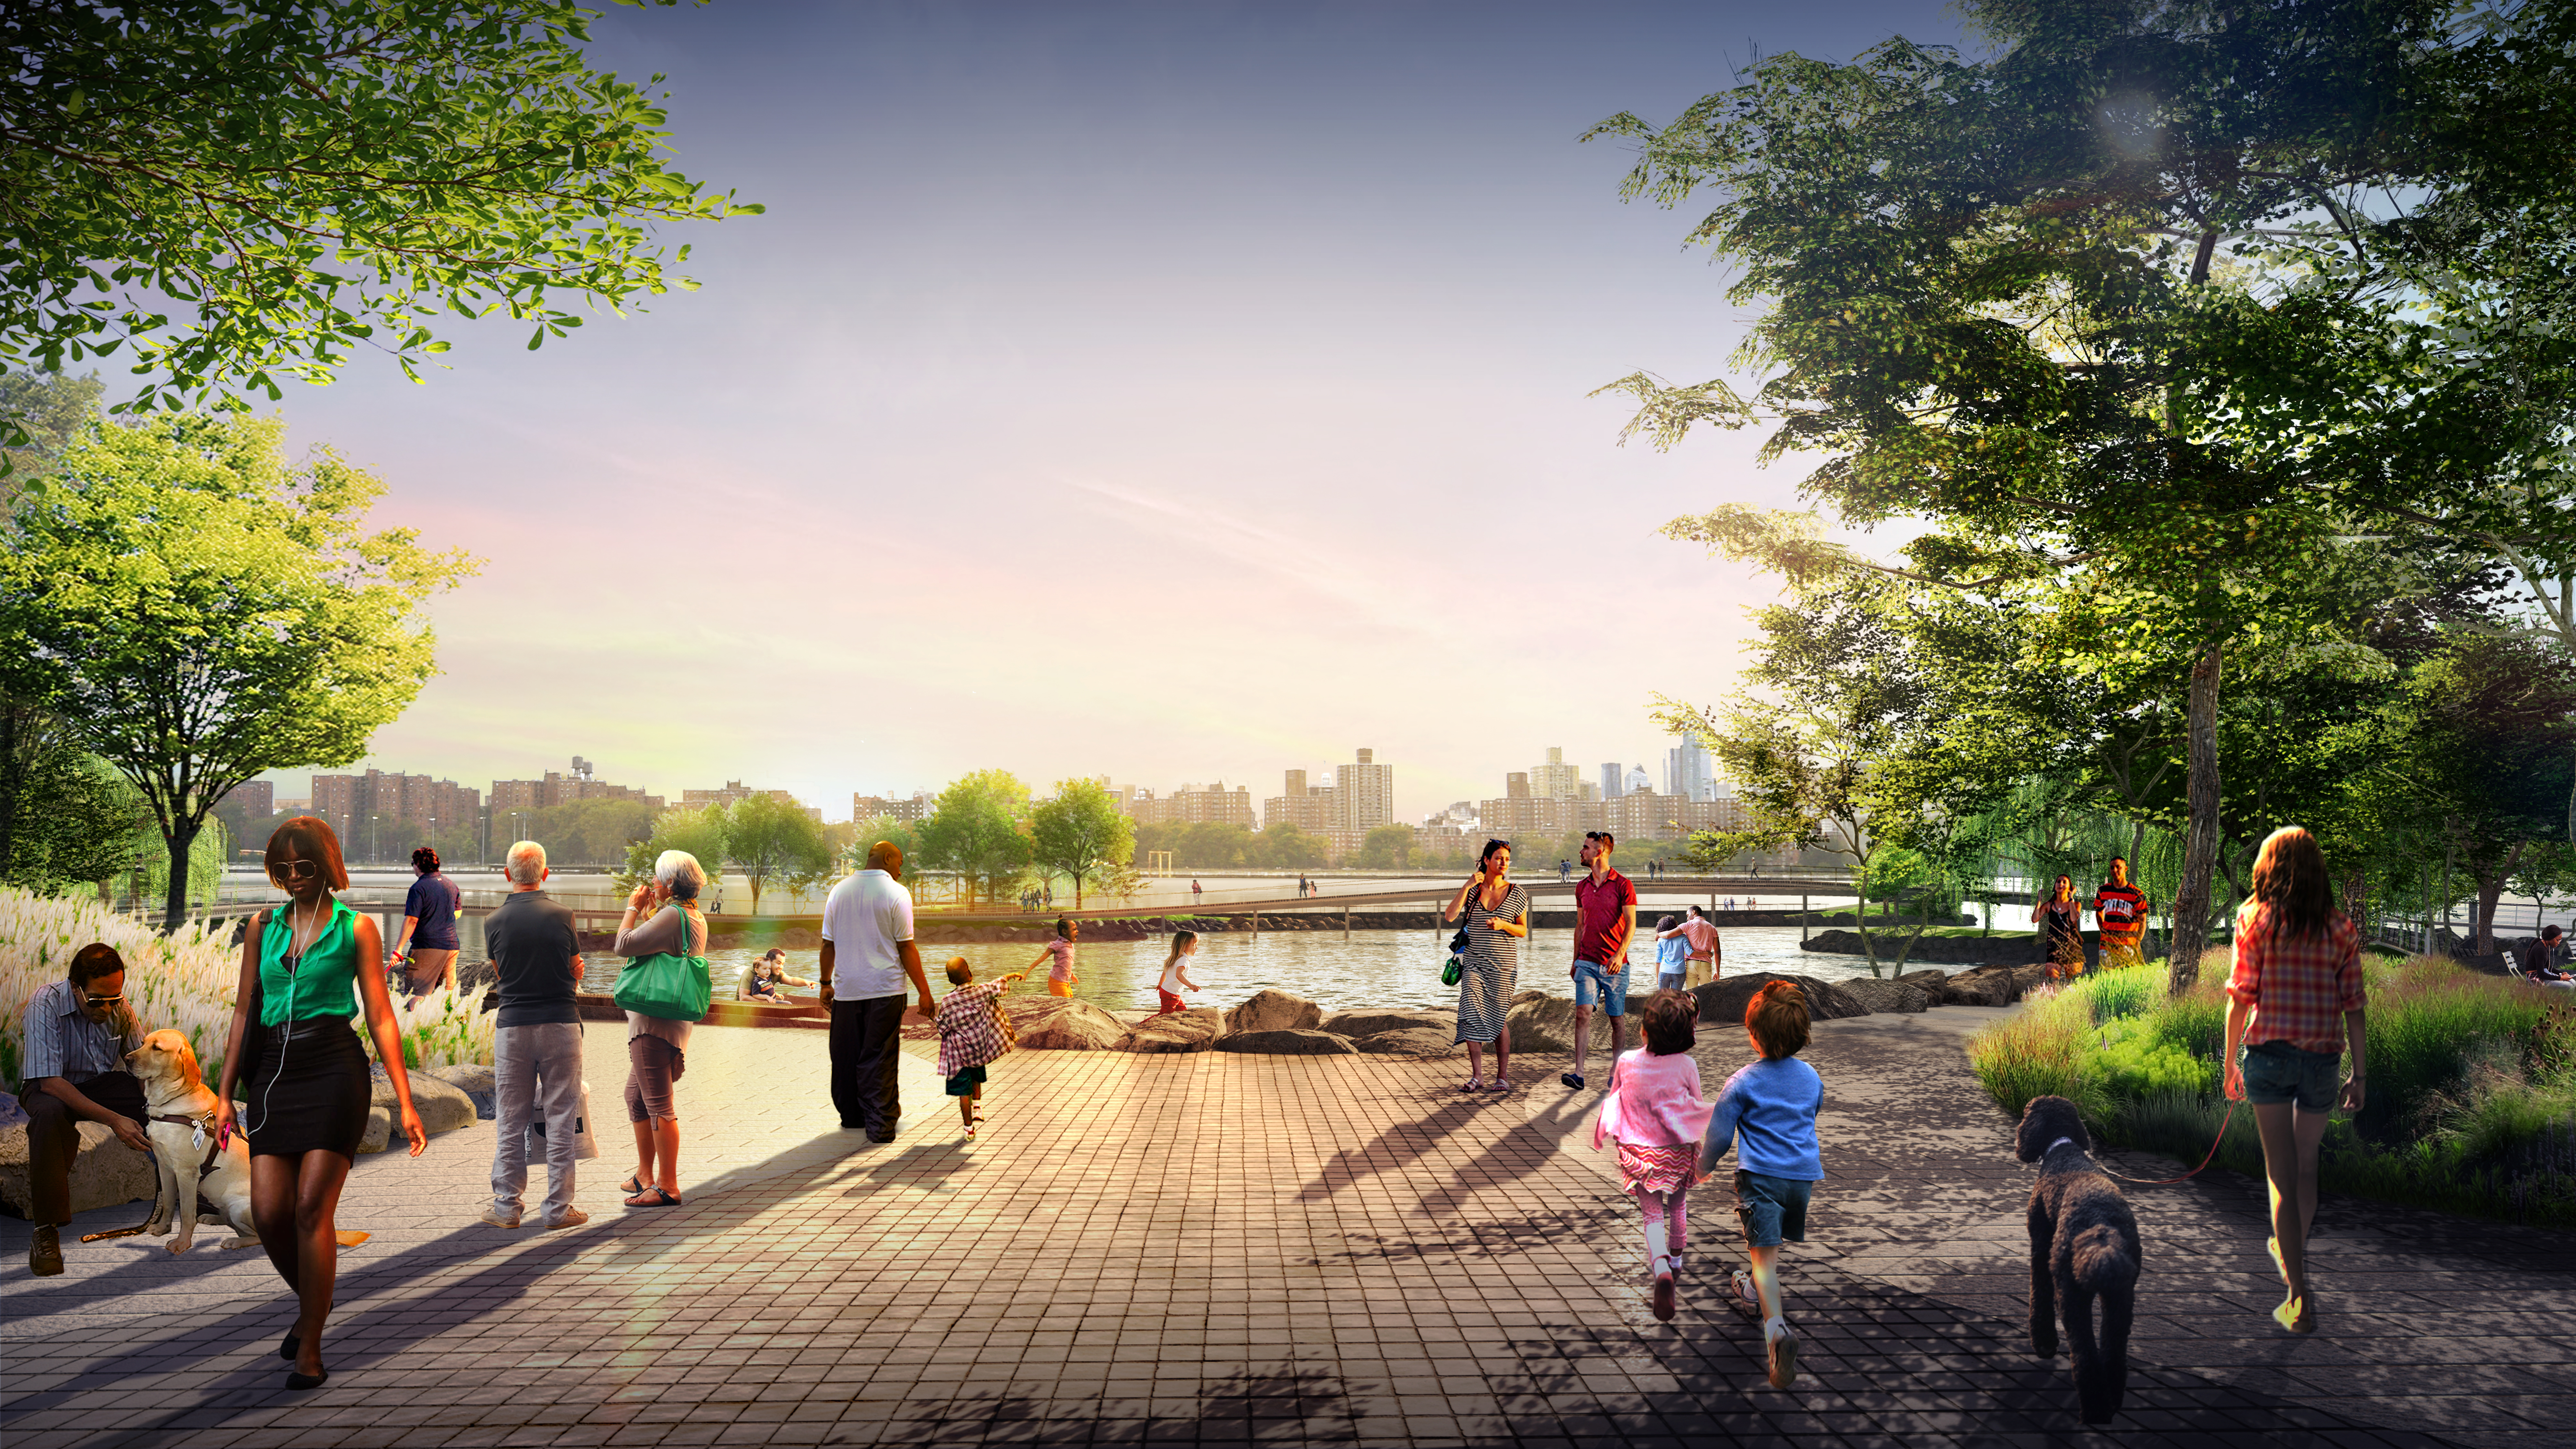 Here is the park planned for Two Trees’ River Street development. Rendering by James Corner Field Operations and BIG-Bjarke Ingels Group courtesy of Two Trees Management